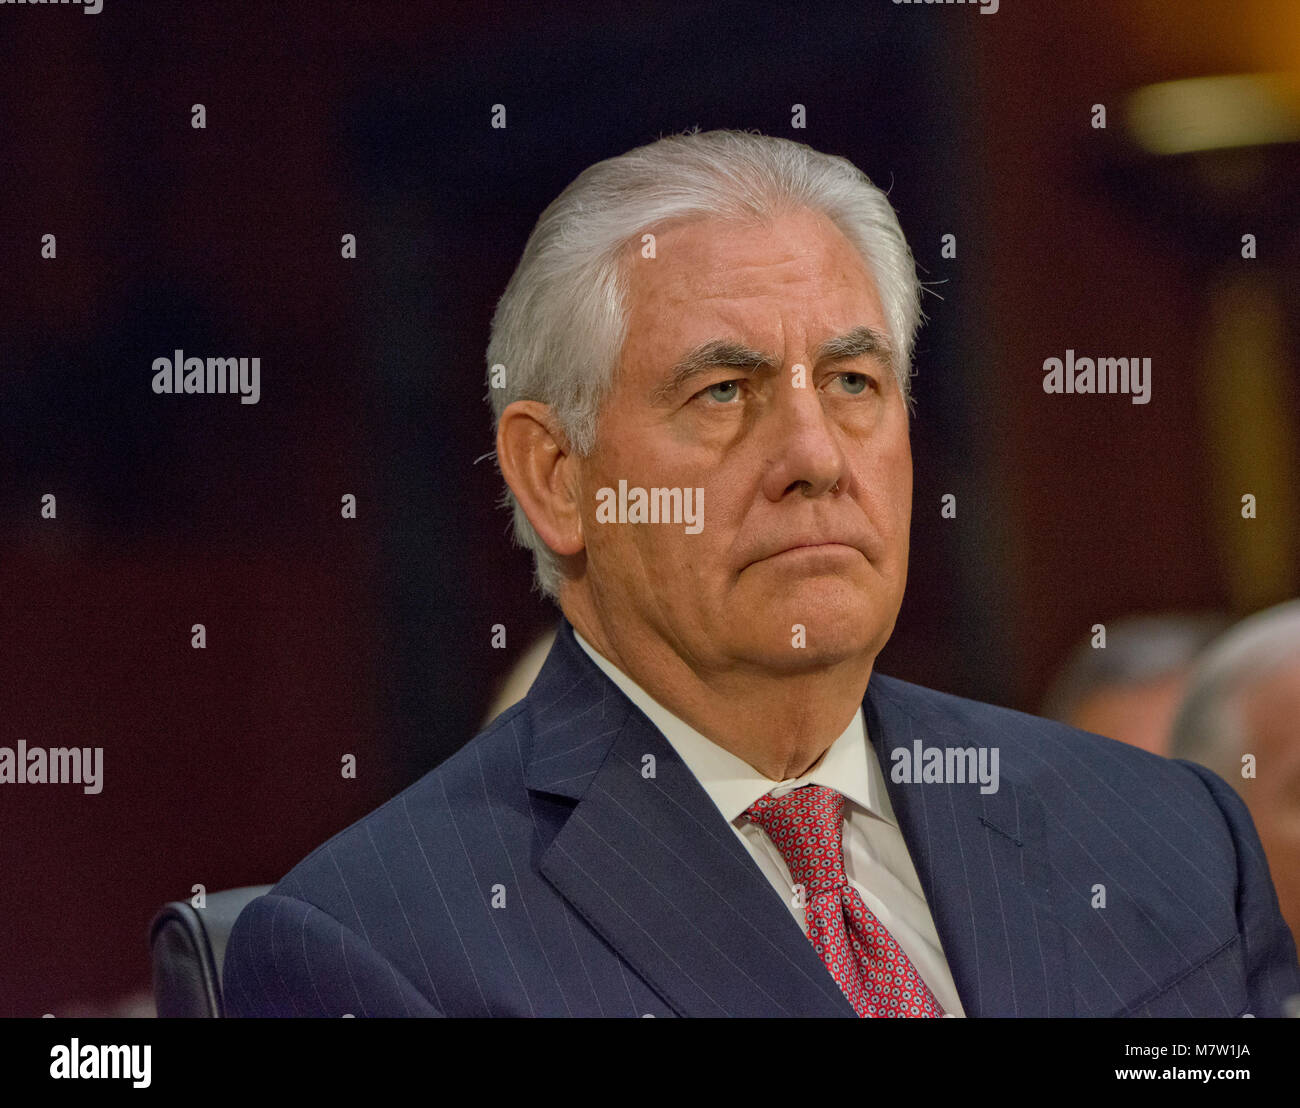 ***FILE PHOTO*** Trump Fires Tillerson As secretary Of State Rex Wayne Tillerson, former chairman and chief executive officer of ExxonMobil testifies before the United States Senate Committee on Foreign Relations considering his nomination of to be Secretary of State of the US on Capitol Hill in Washington, DC on Wednesday, January 11, 2017. Credit: Patsy Lynch/MediaPunch Stock Photo